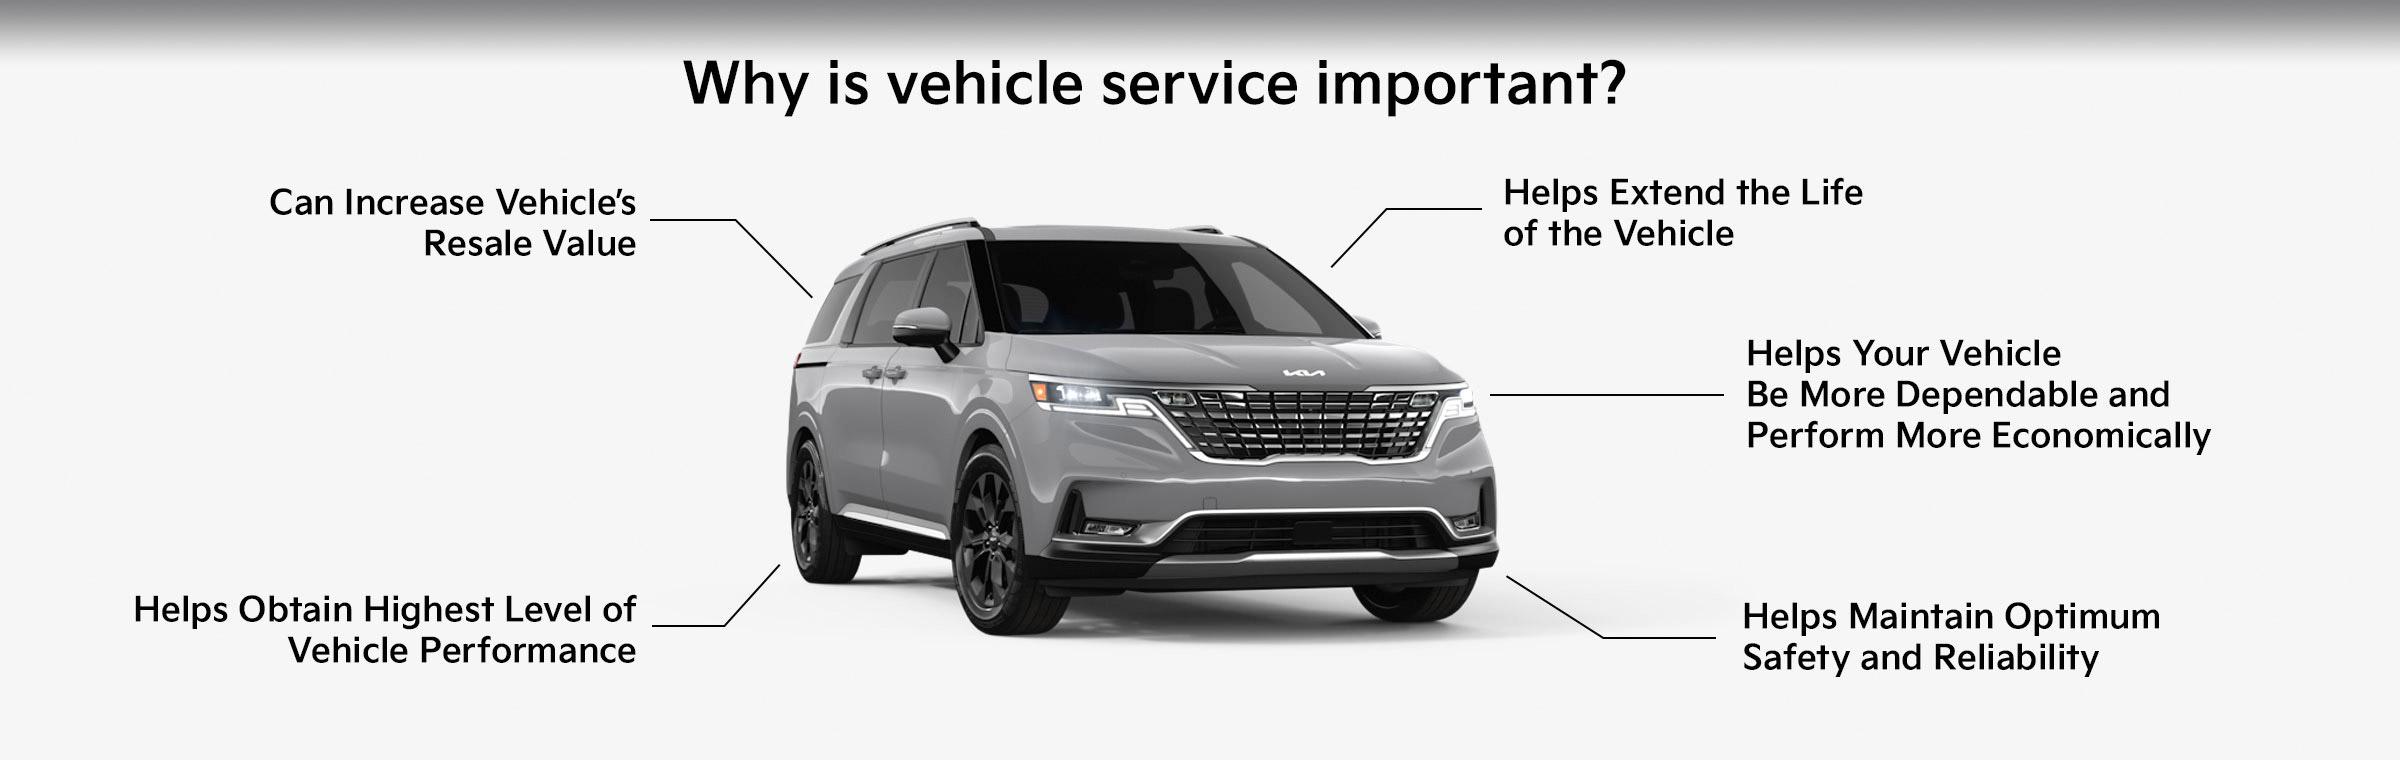 Why is vehicle service important? Can Increase Vehicle's Resale Value, Helps Obtain Highest Level of Vehicle Performance, Helps Extend the Life of the Vehicle, Helps Your Vehicle BeMore Dependable andPerform More Economically, and Helps Maintain Optimum Safety and Reliability.